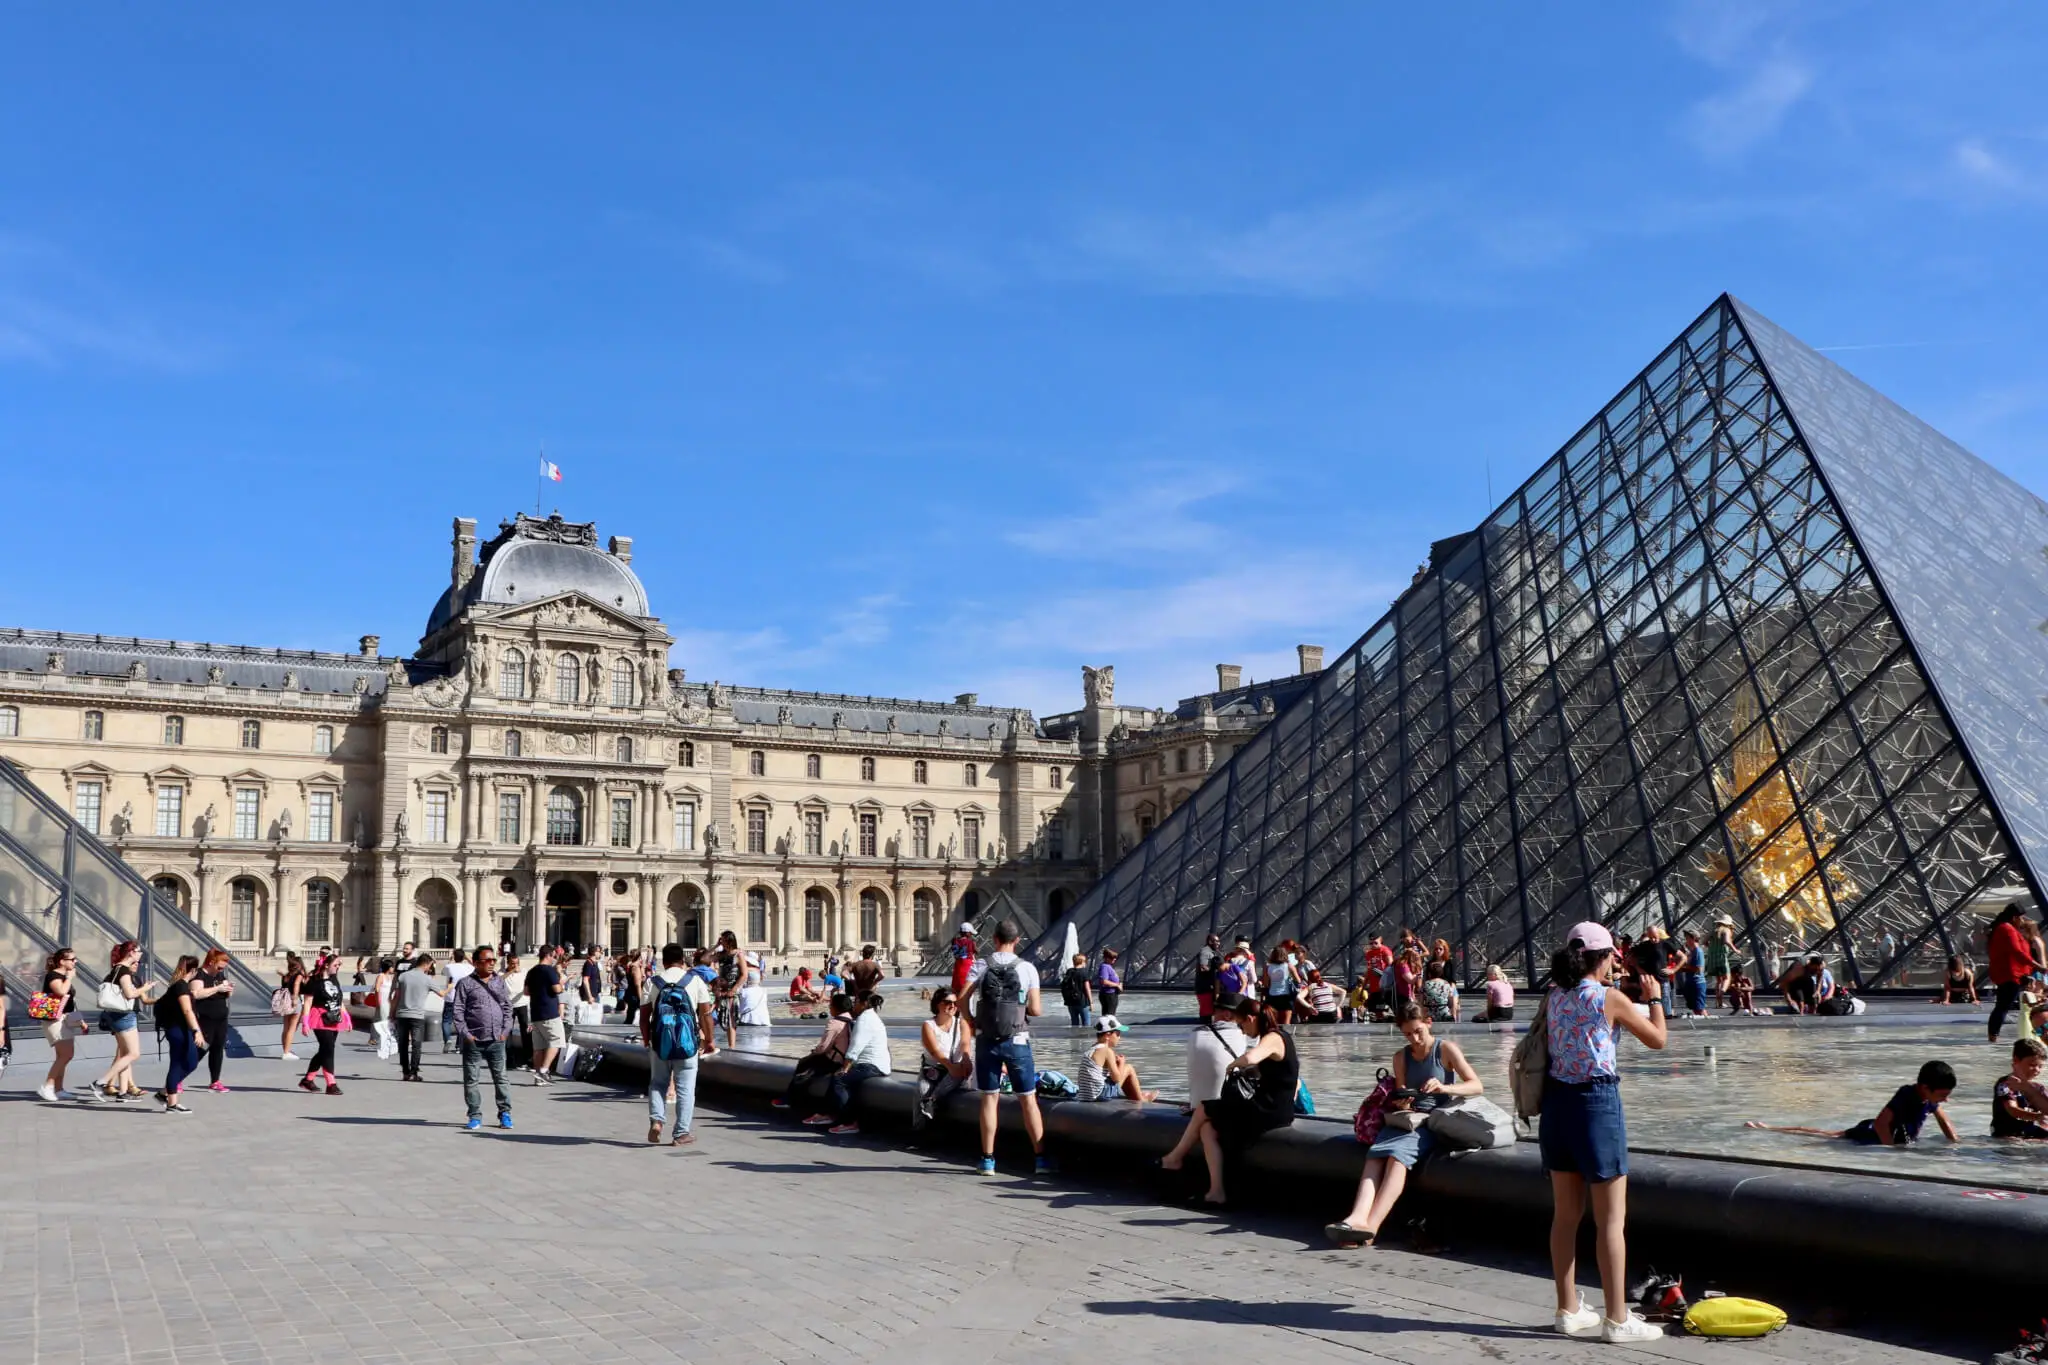 Exterior of the Louvre in Paris with glass pyramid in foreground